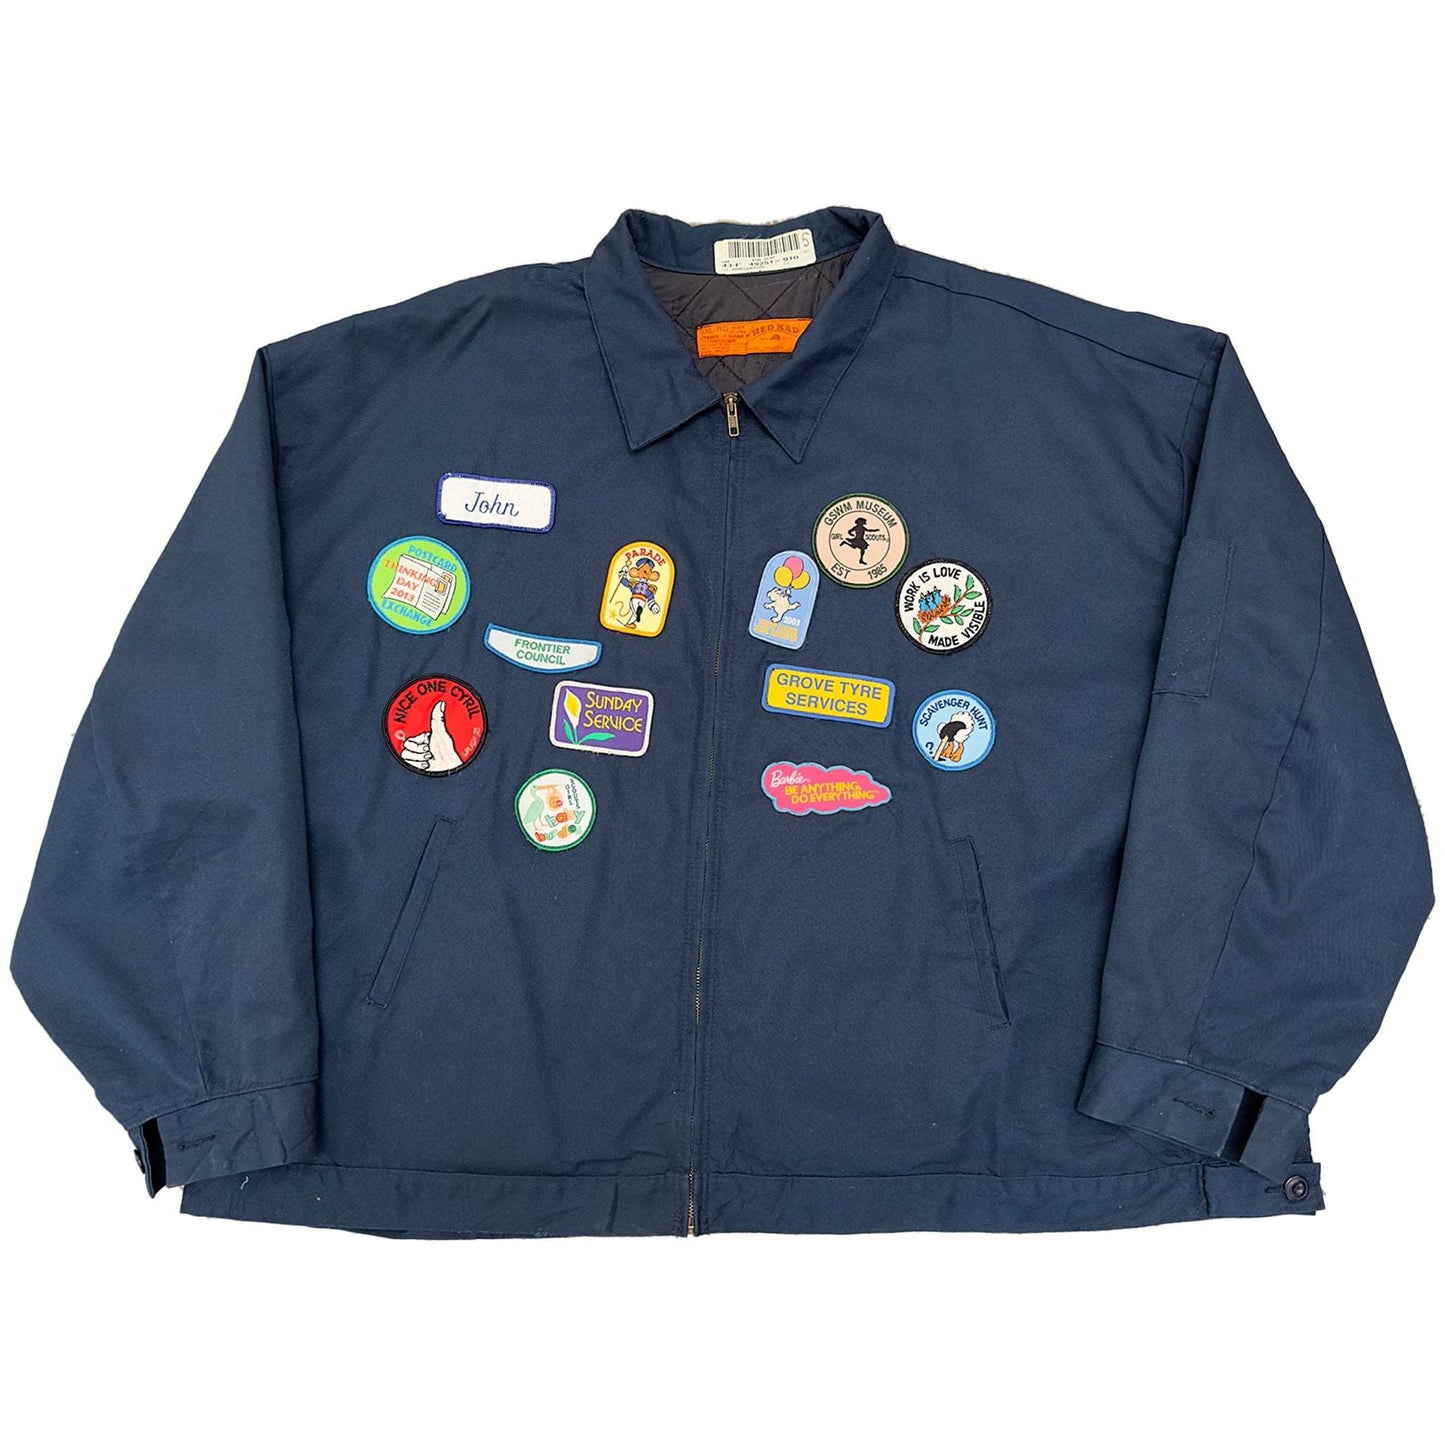 The Girl Scout Jacket